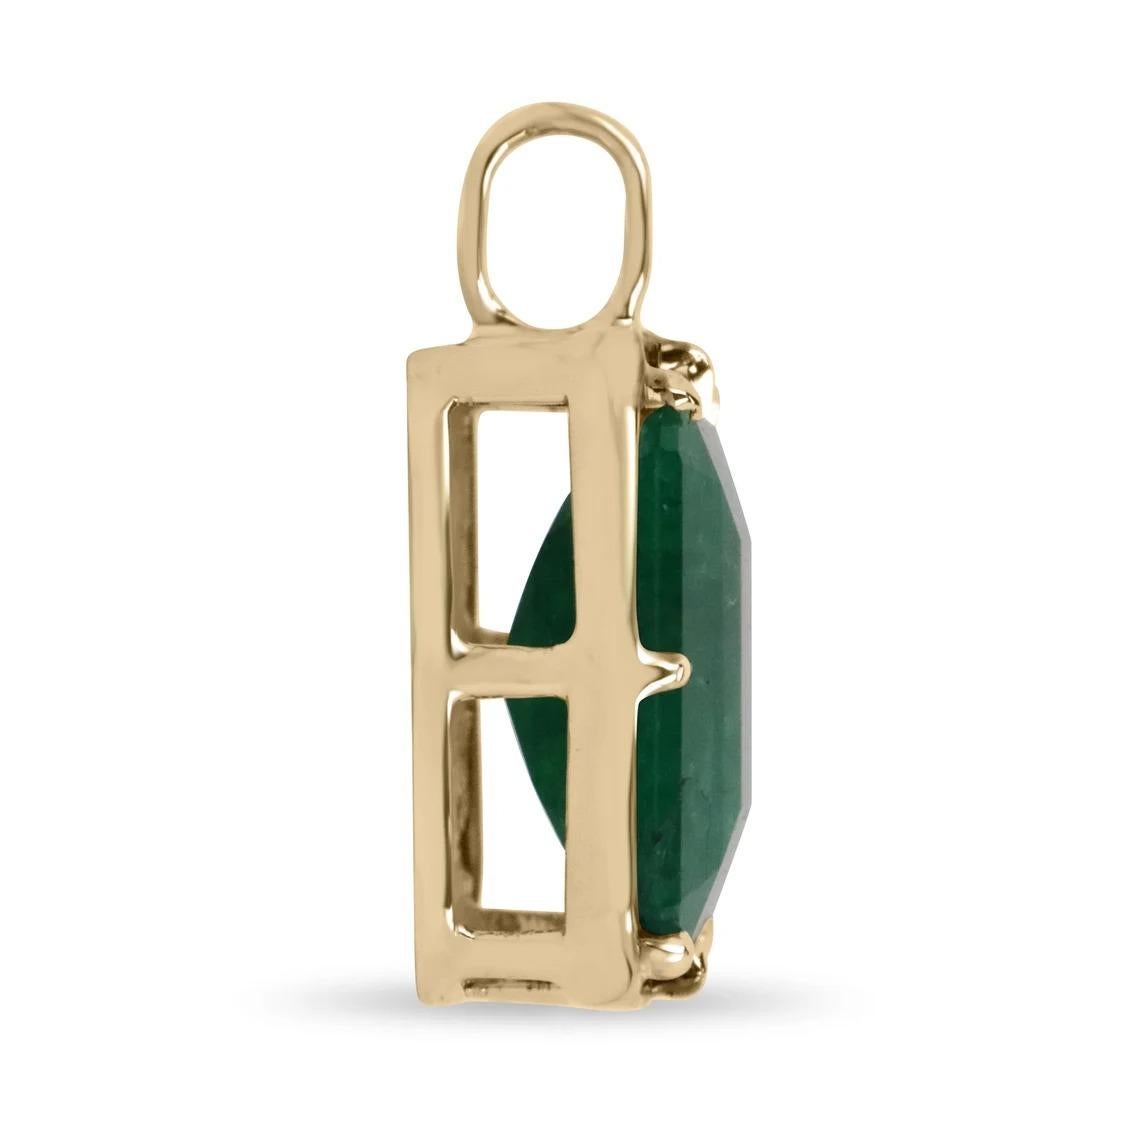 Displayed is a natural emerald Georgian-styled solitaire pendant in 14K yellow gold. This gorgeous solitaire pendant carries a full 17.50-carat Brazilian emerald in a prong setting. Black rhodium highlights the emeralds' bezel and prongs. Fully